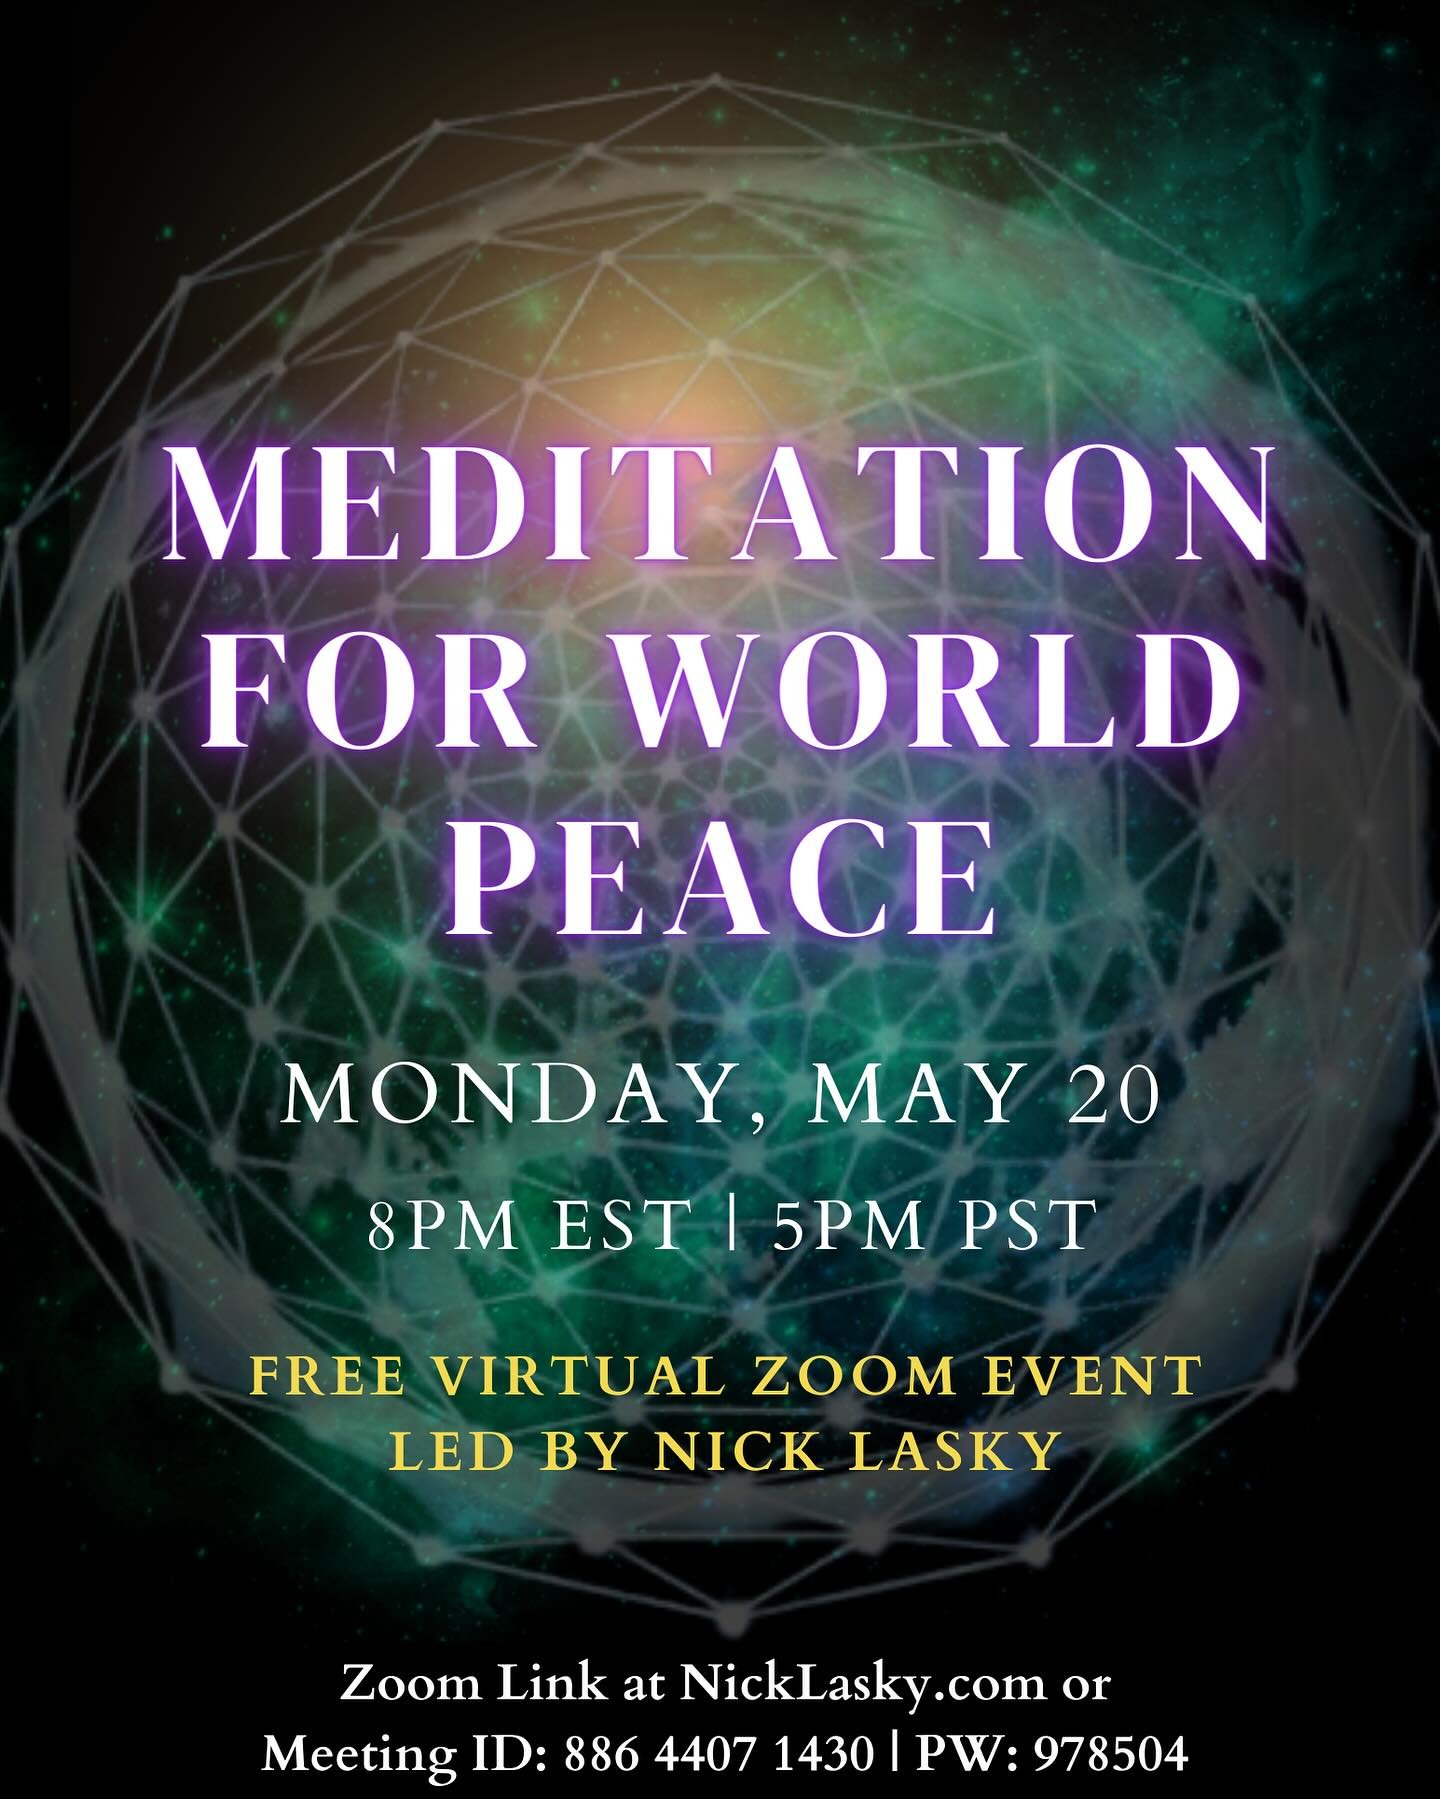 Join me for a 30min guided meditation on 5/20.

We will drop in and create a grid of light across the planet and emanate prayers for peace🌞☮️

As presently there is so much division and ideologies that seek to divide, diminish our collective humanit